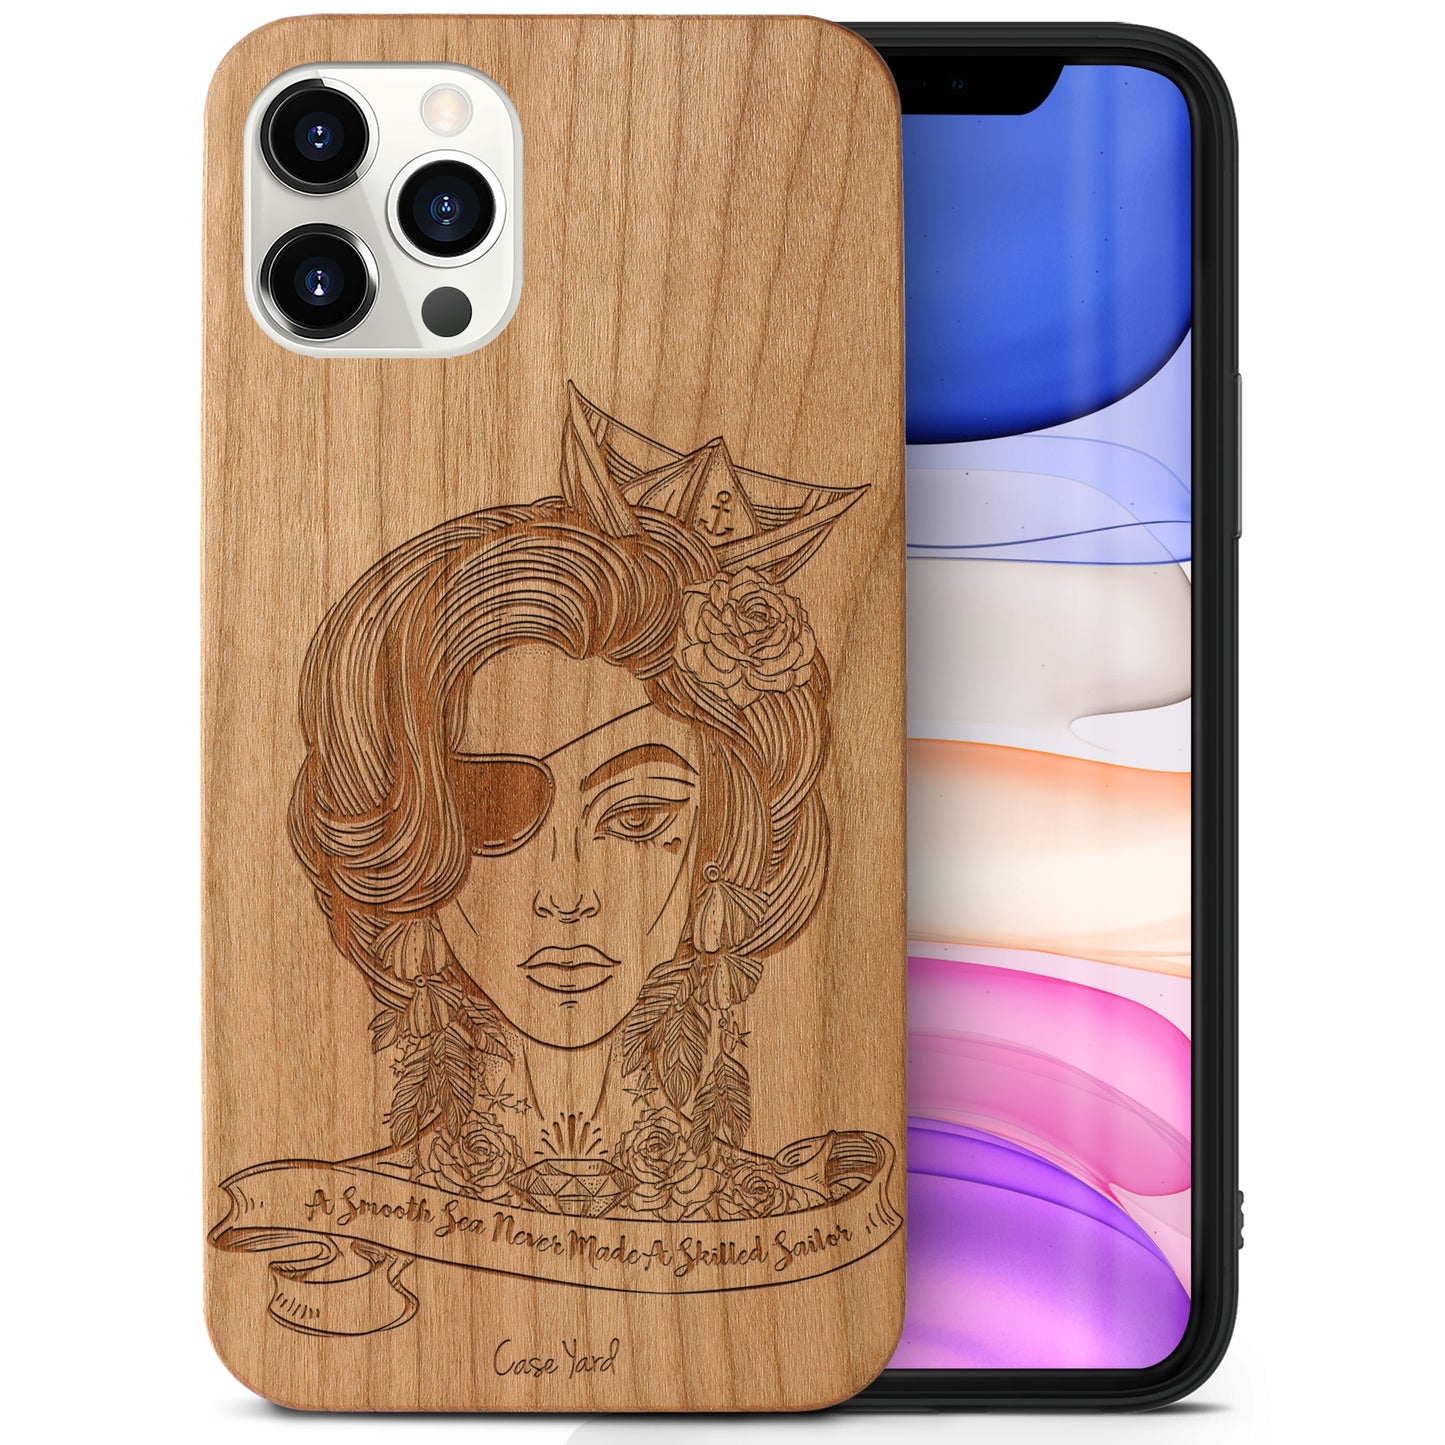 Wooden Cell Phone Case Cover, Laser Engraved case for iPhone & Samsung phone Skillful Sailor Design